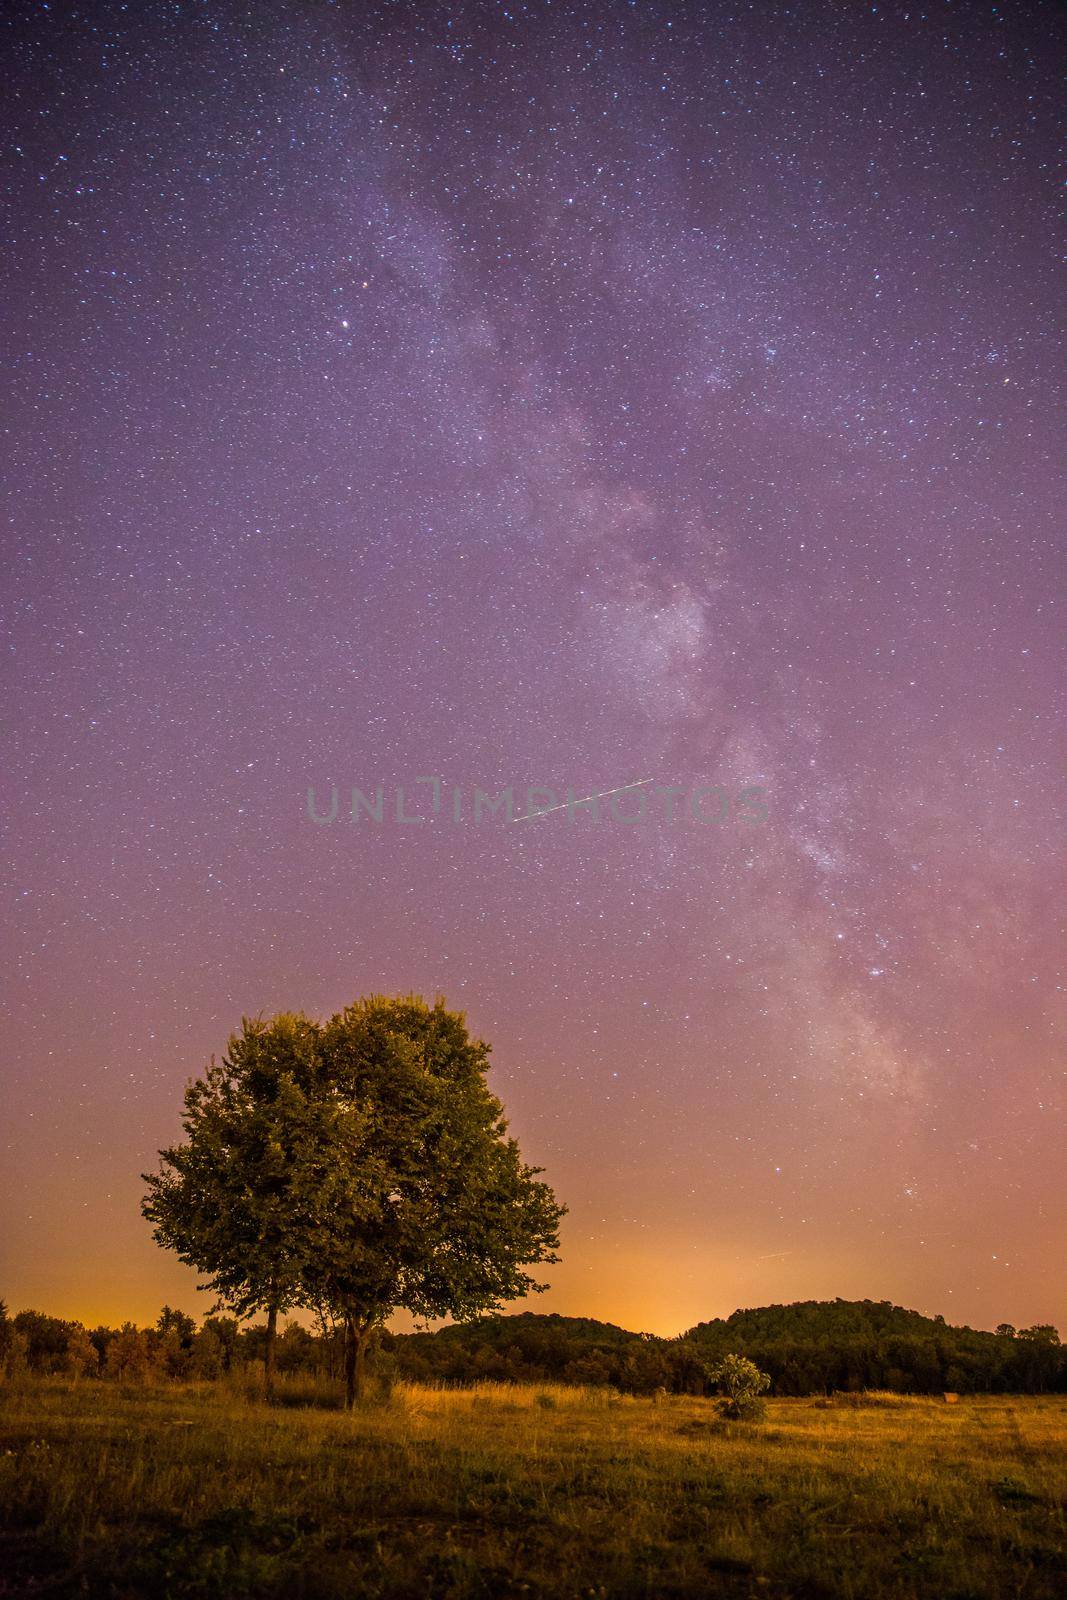 Night and stars Landscape: Clear Milky way at night, lonely field and tree by Daxenbichler